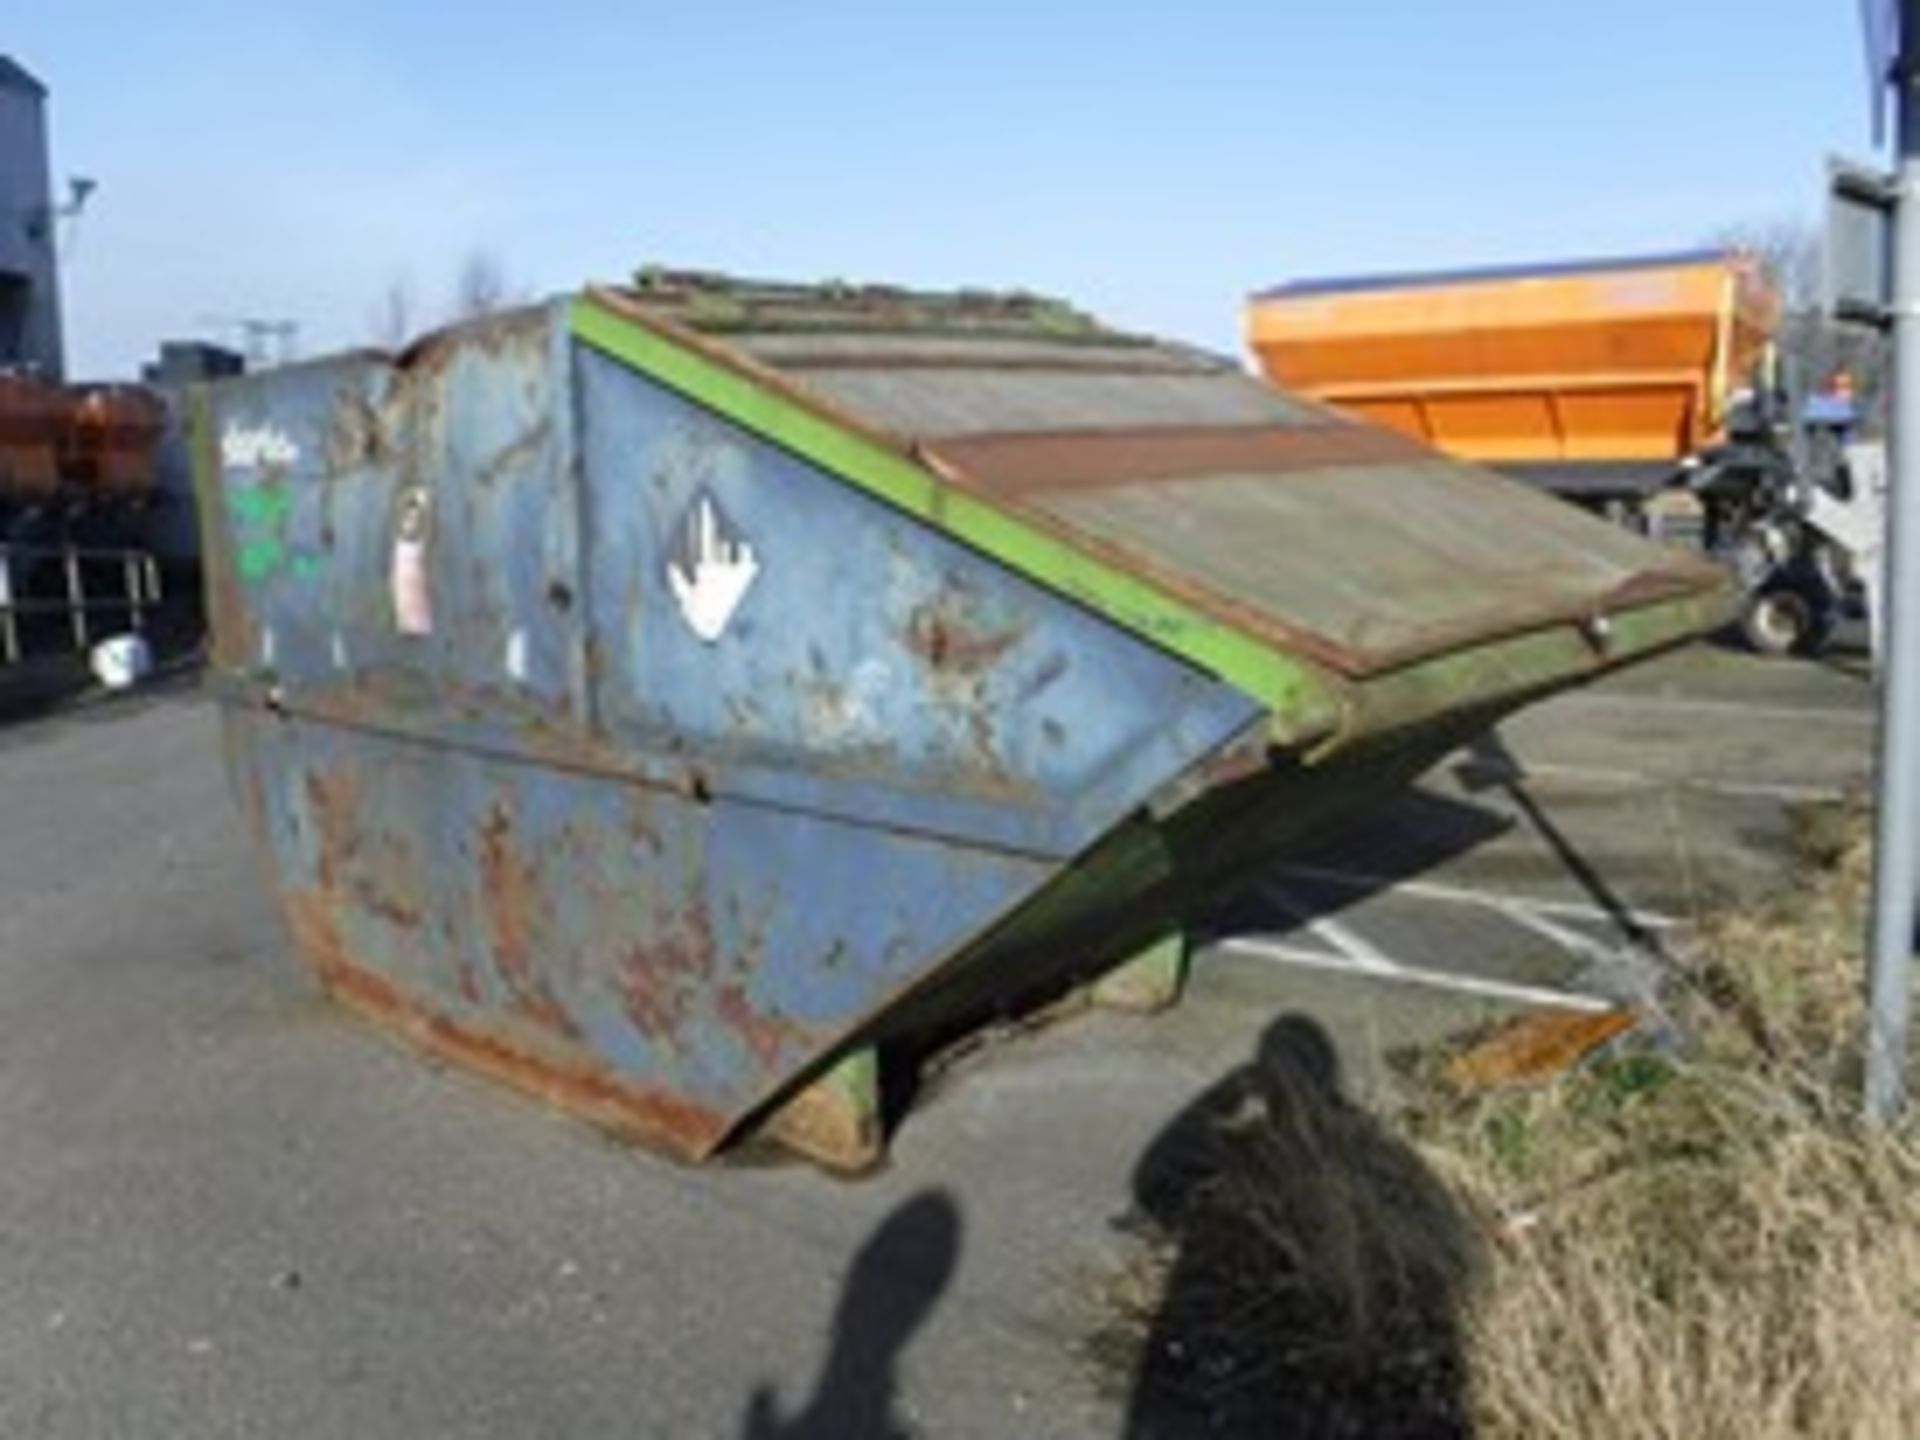 CLOSED SKIP. VIDEO OF ALL SKIPS CAN BE EMAILED TO YOU BY CONTACTING JONNY.BELL@MORRISLESLIE.CO.UK. V